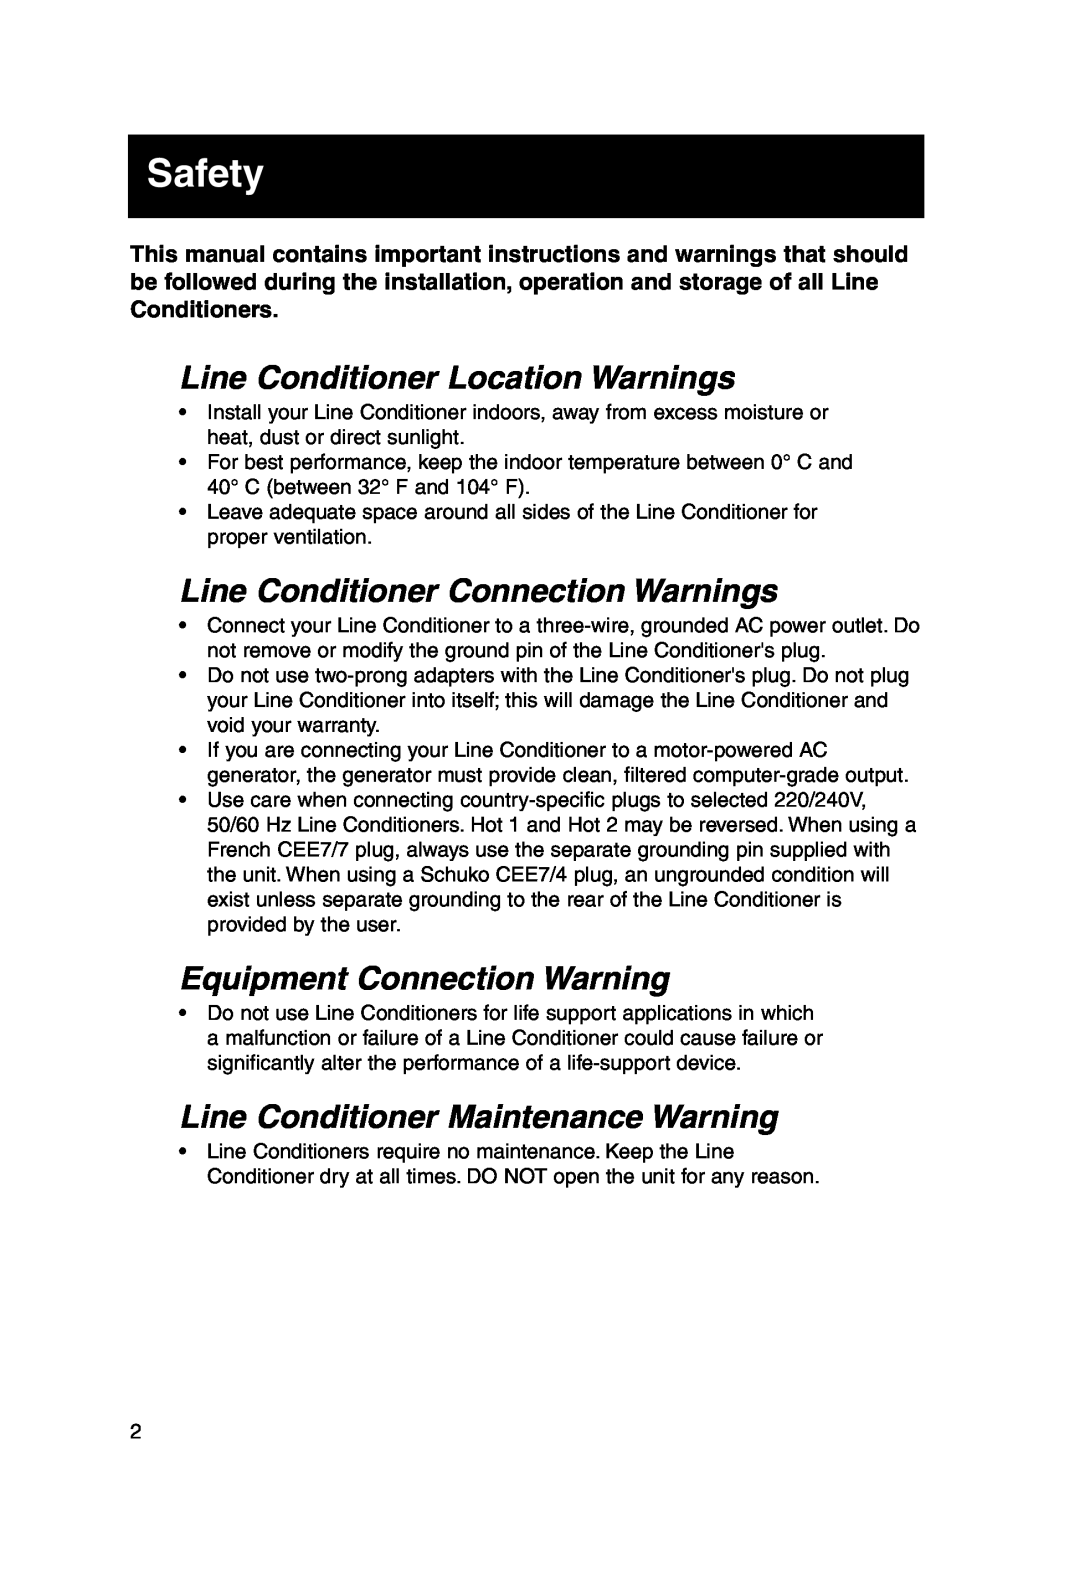 Tripp Lite 230V owner manual Safety, Line Conditioner Location Warnings, Line Conditioner Connection Warnings 